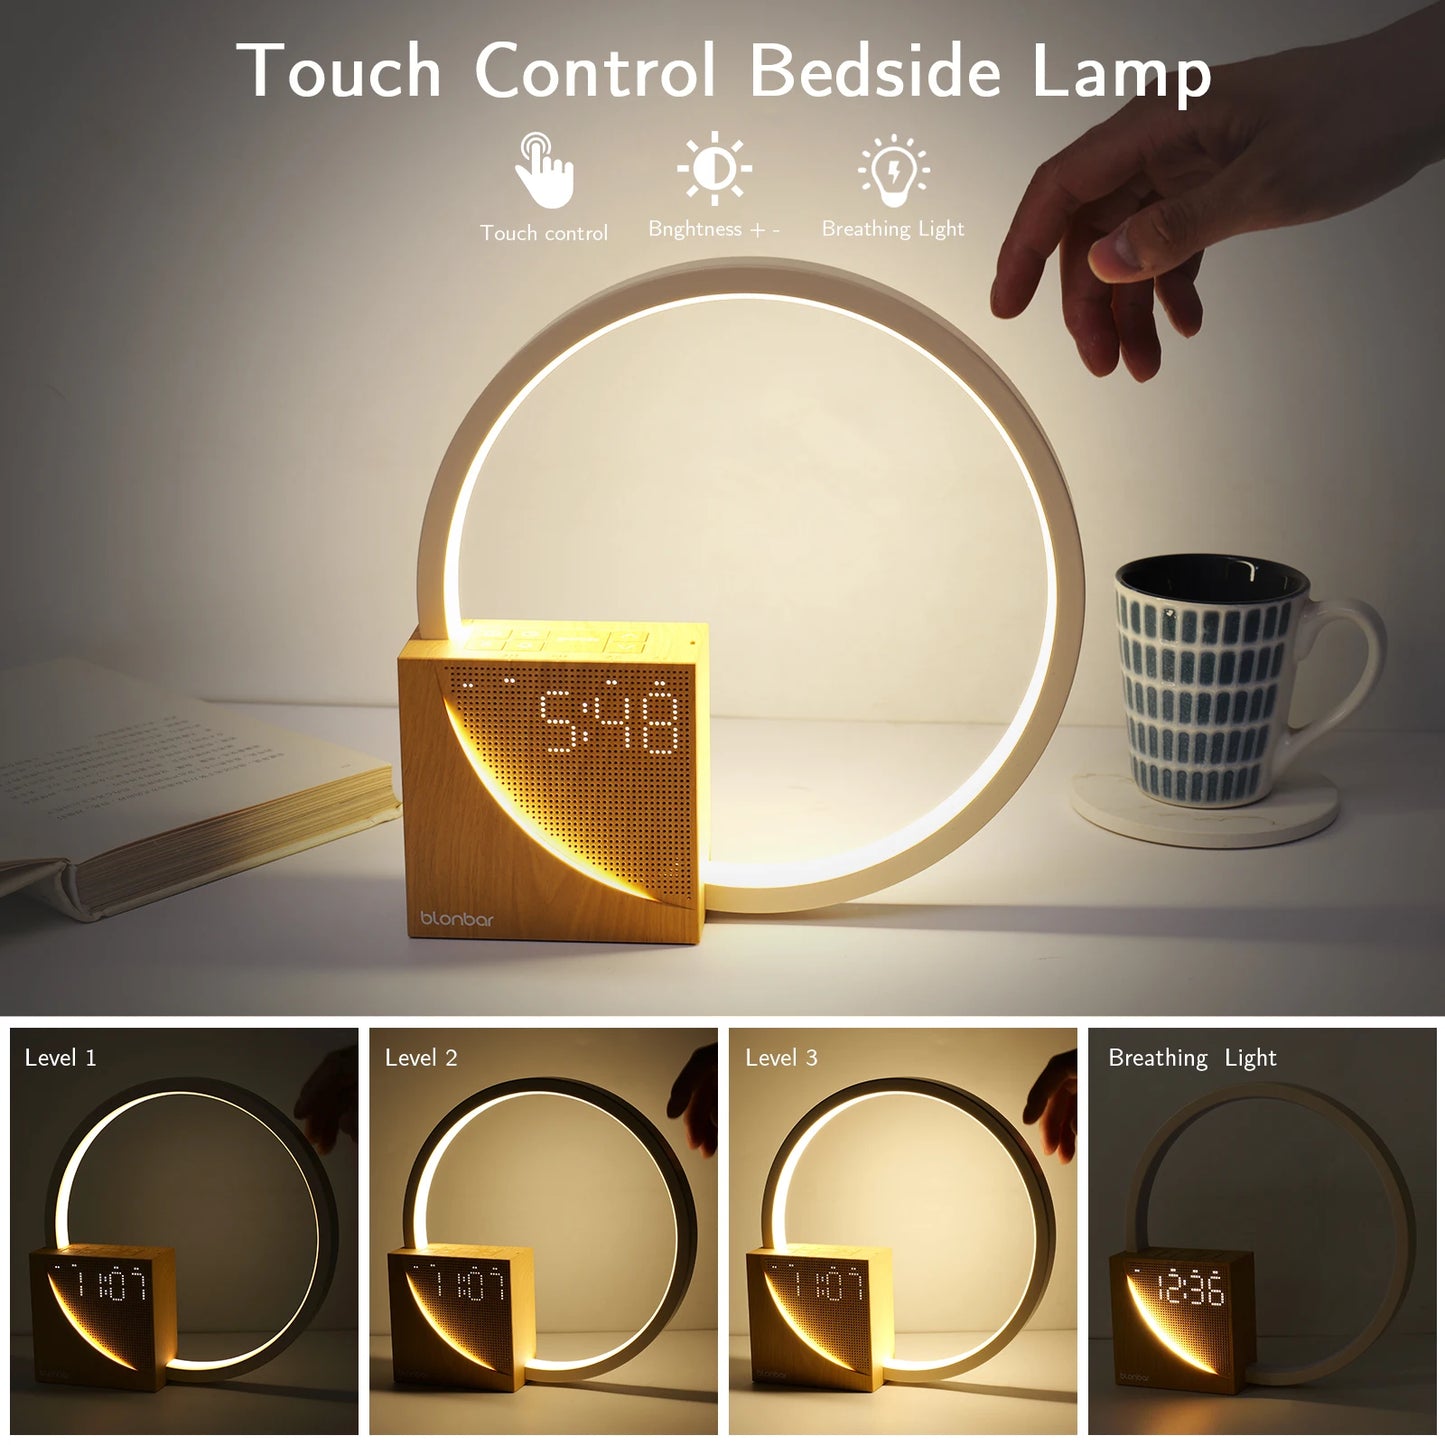 BESIDE TOUCH LAMP